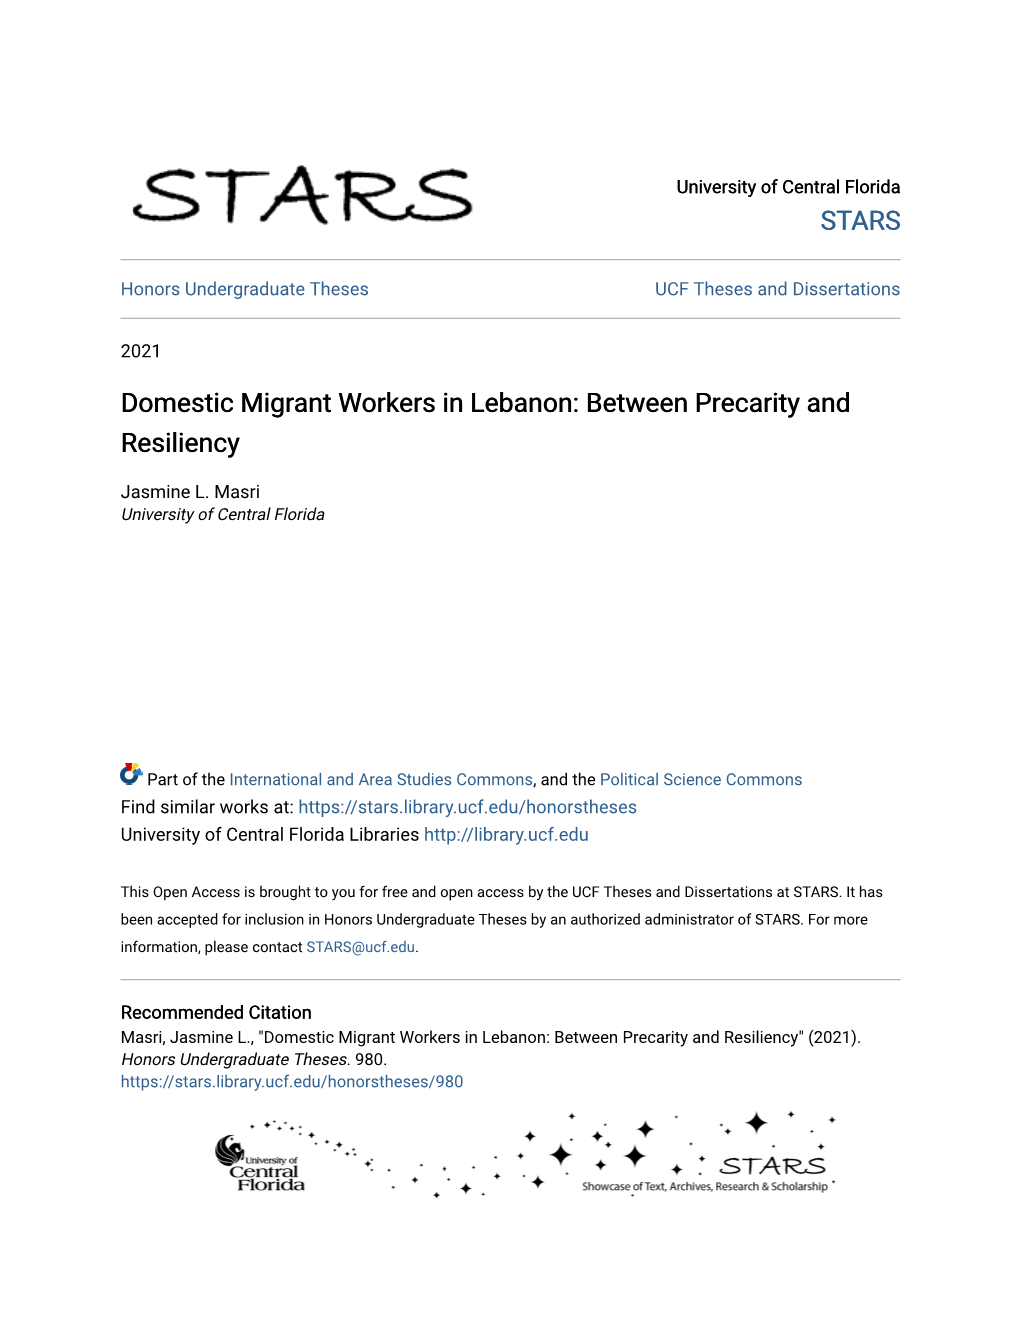 Domestic Migrant Workers in Lebanon: Between Precarity and Resiliency